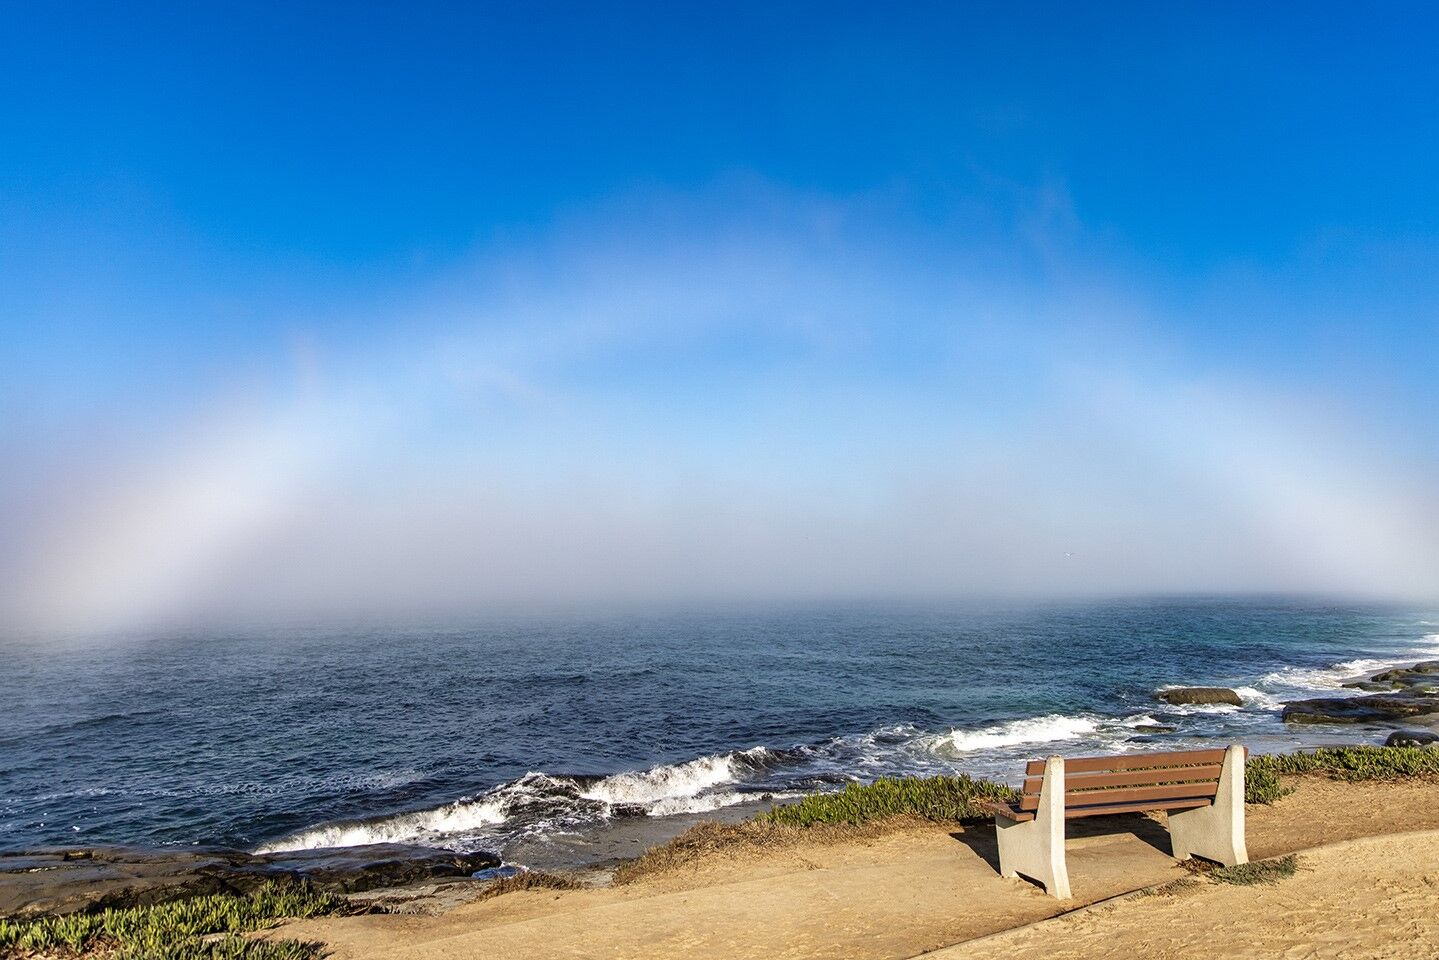 A fog bow, or "ghost rainbow," appears at Windansea, a result of very small water droplets in fog.